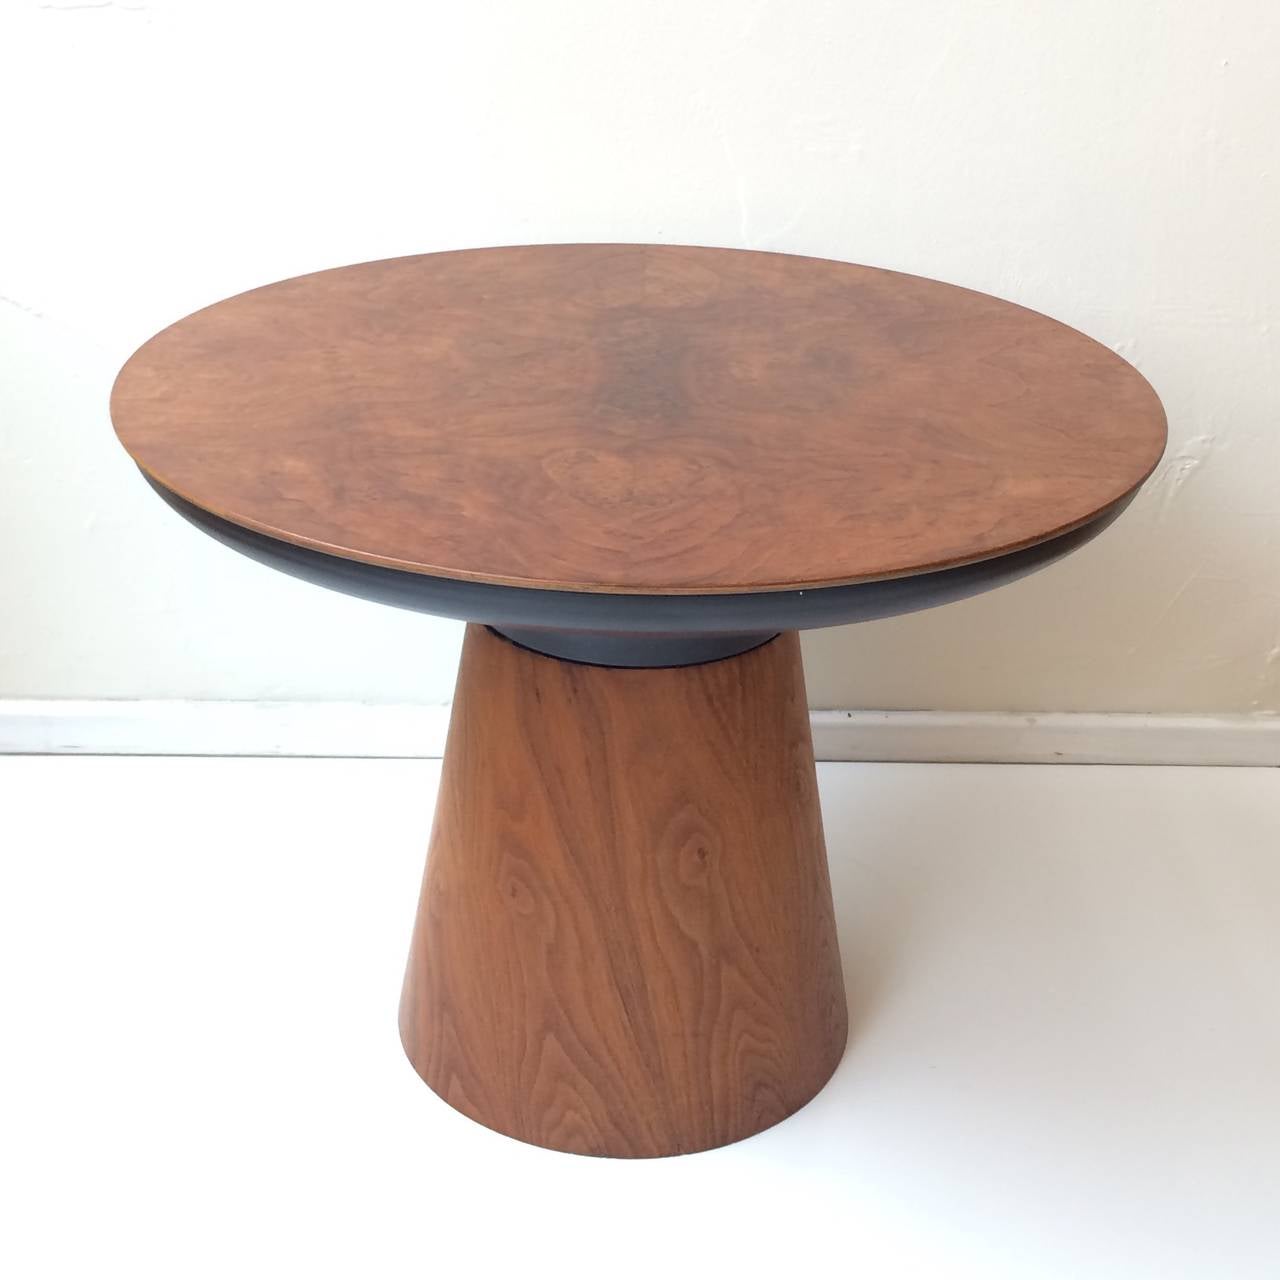 An attractive side table designed by Frank Rohloff.
This table consist of a walnut base with a black metal cone shaped top part that supports a removable inset walnut top.
This gorgeous table was designed in 1968.